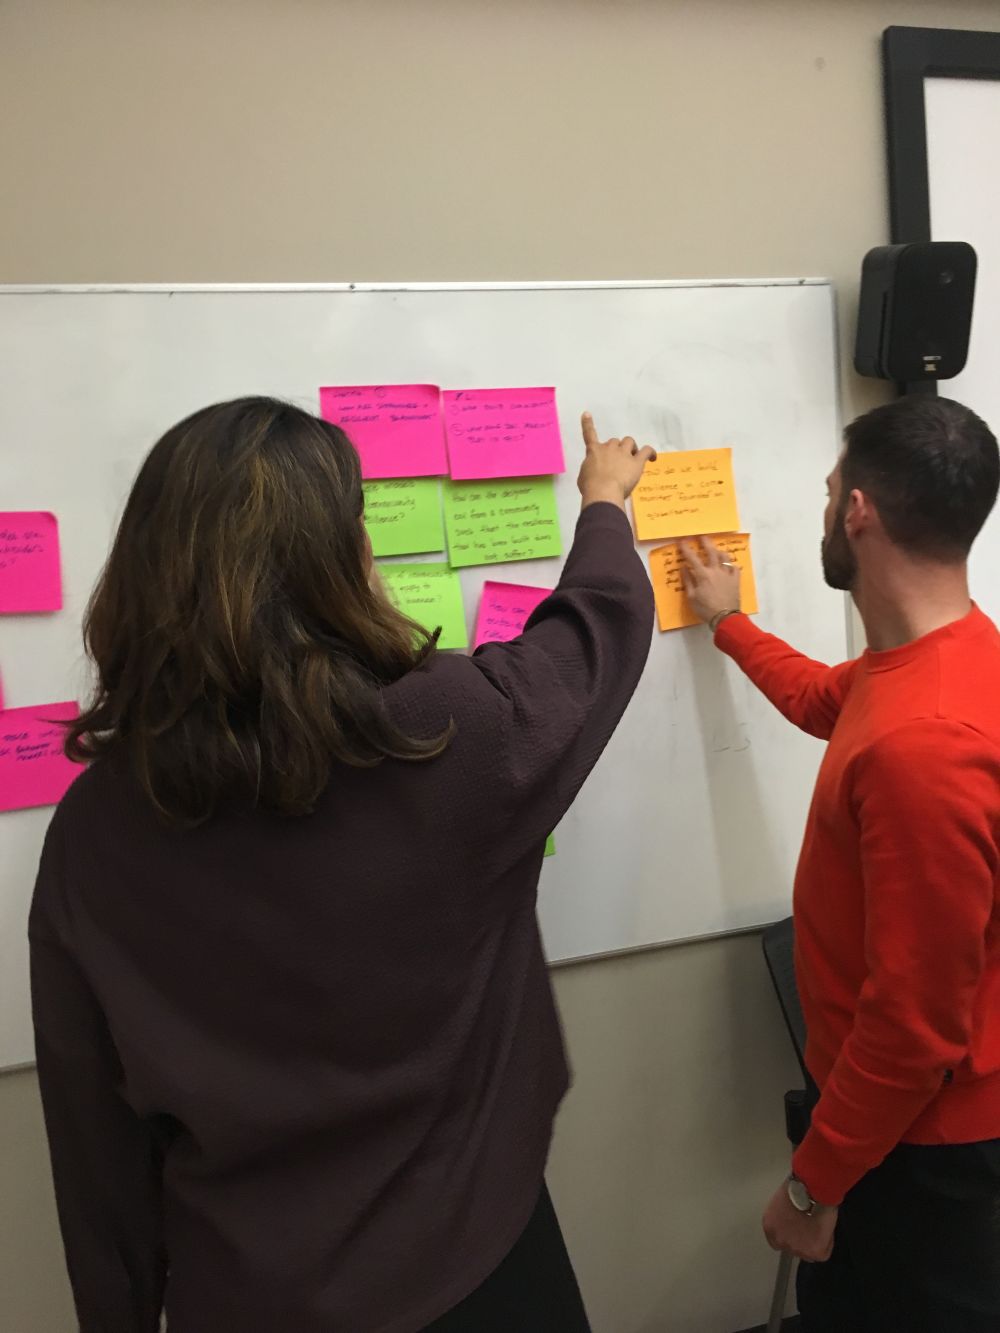 Students putting post-it notes on the white board